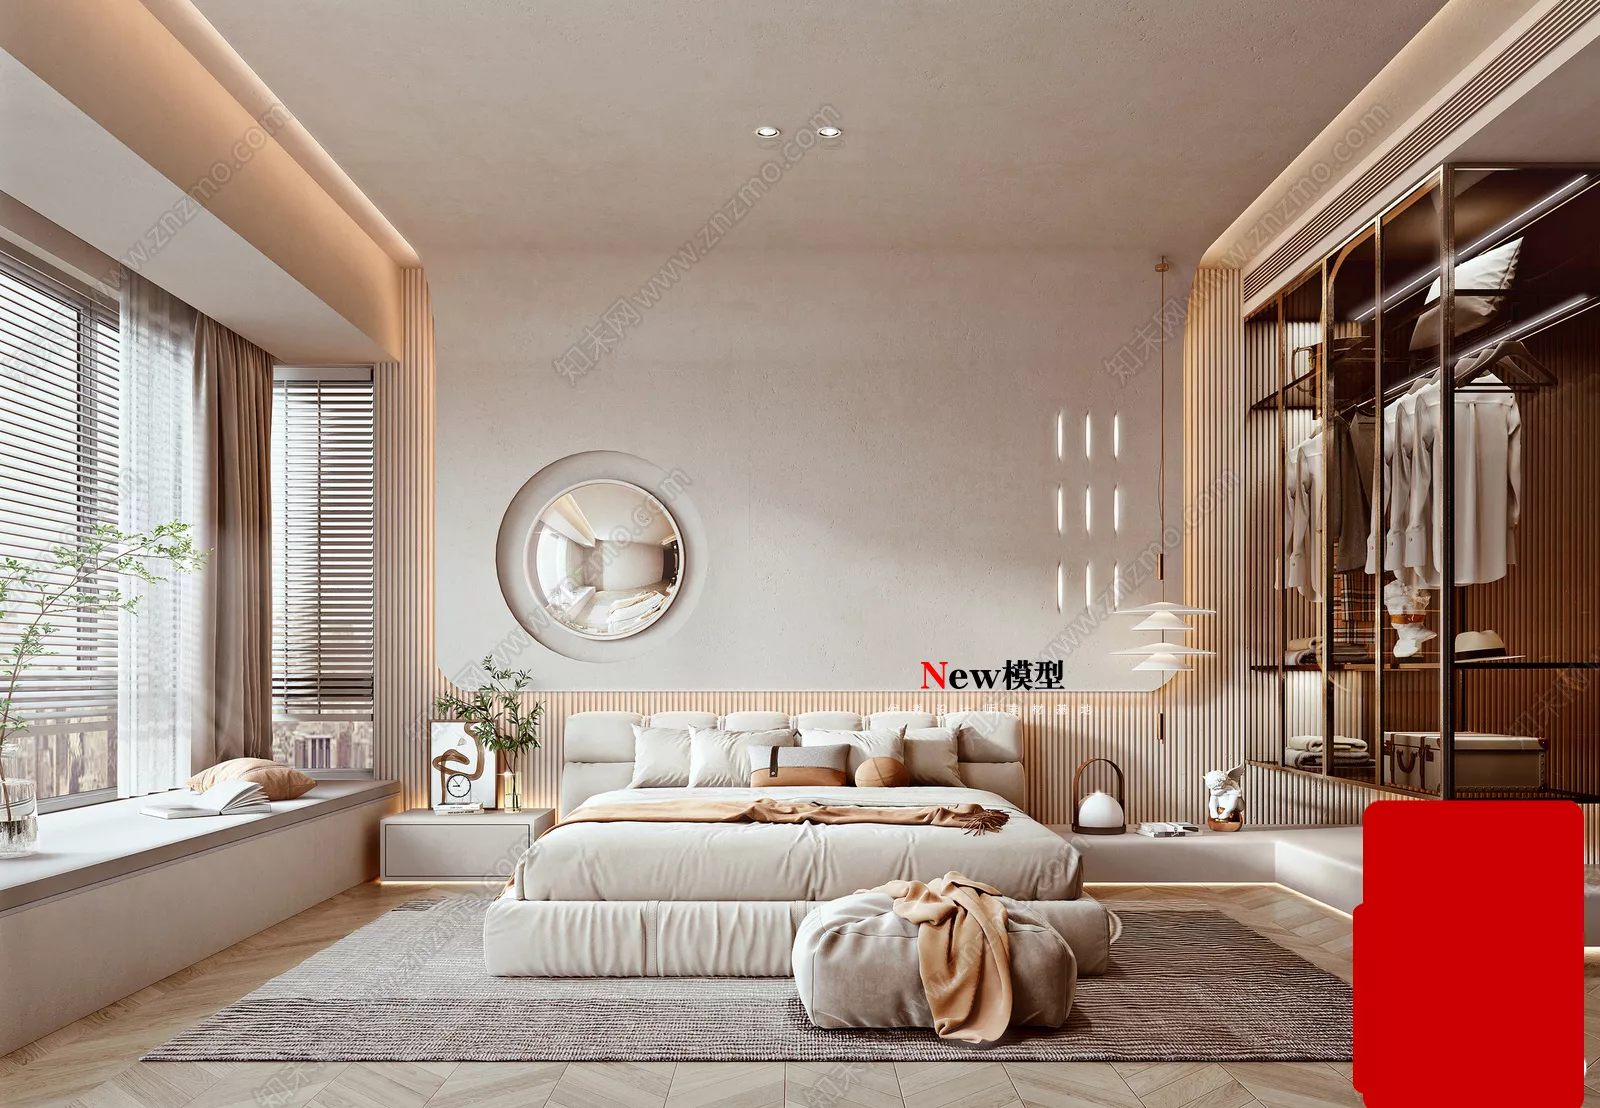 WABI SABI INTERIOR COLLECTION - SKETCHUP 3D SCENE - VRAY OR ENSCAPE - ID17739